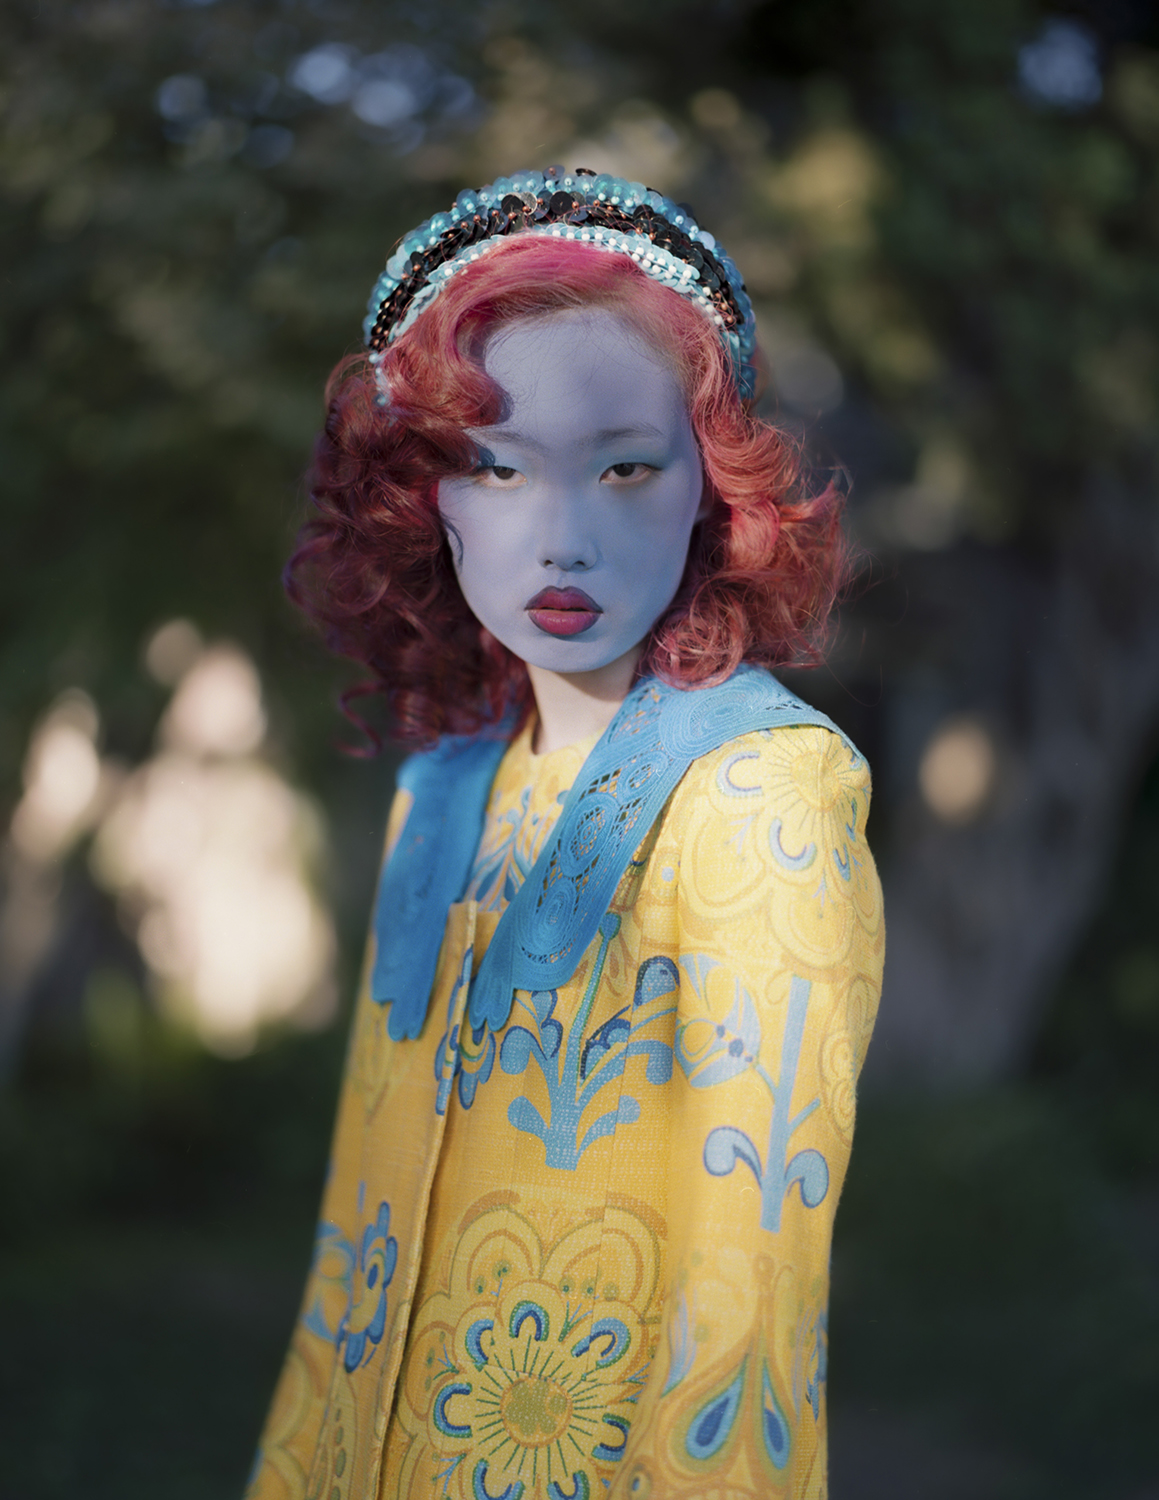 Full body shot of a model with blue facepaint and red lips outdoors in a garden setting